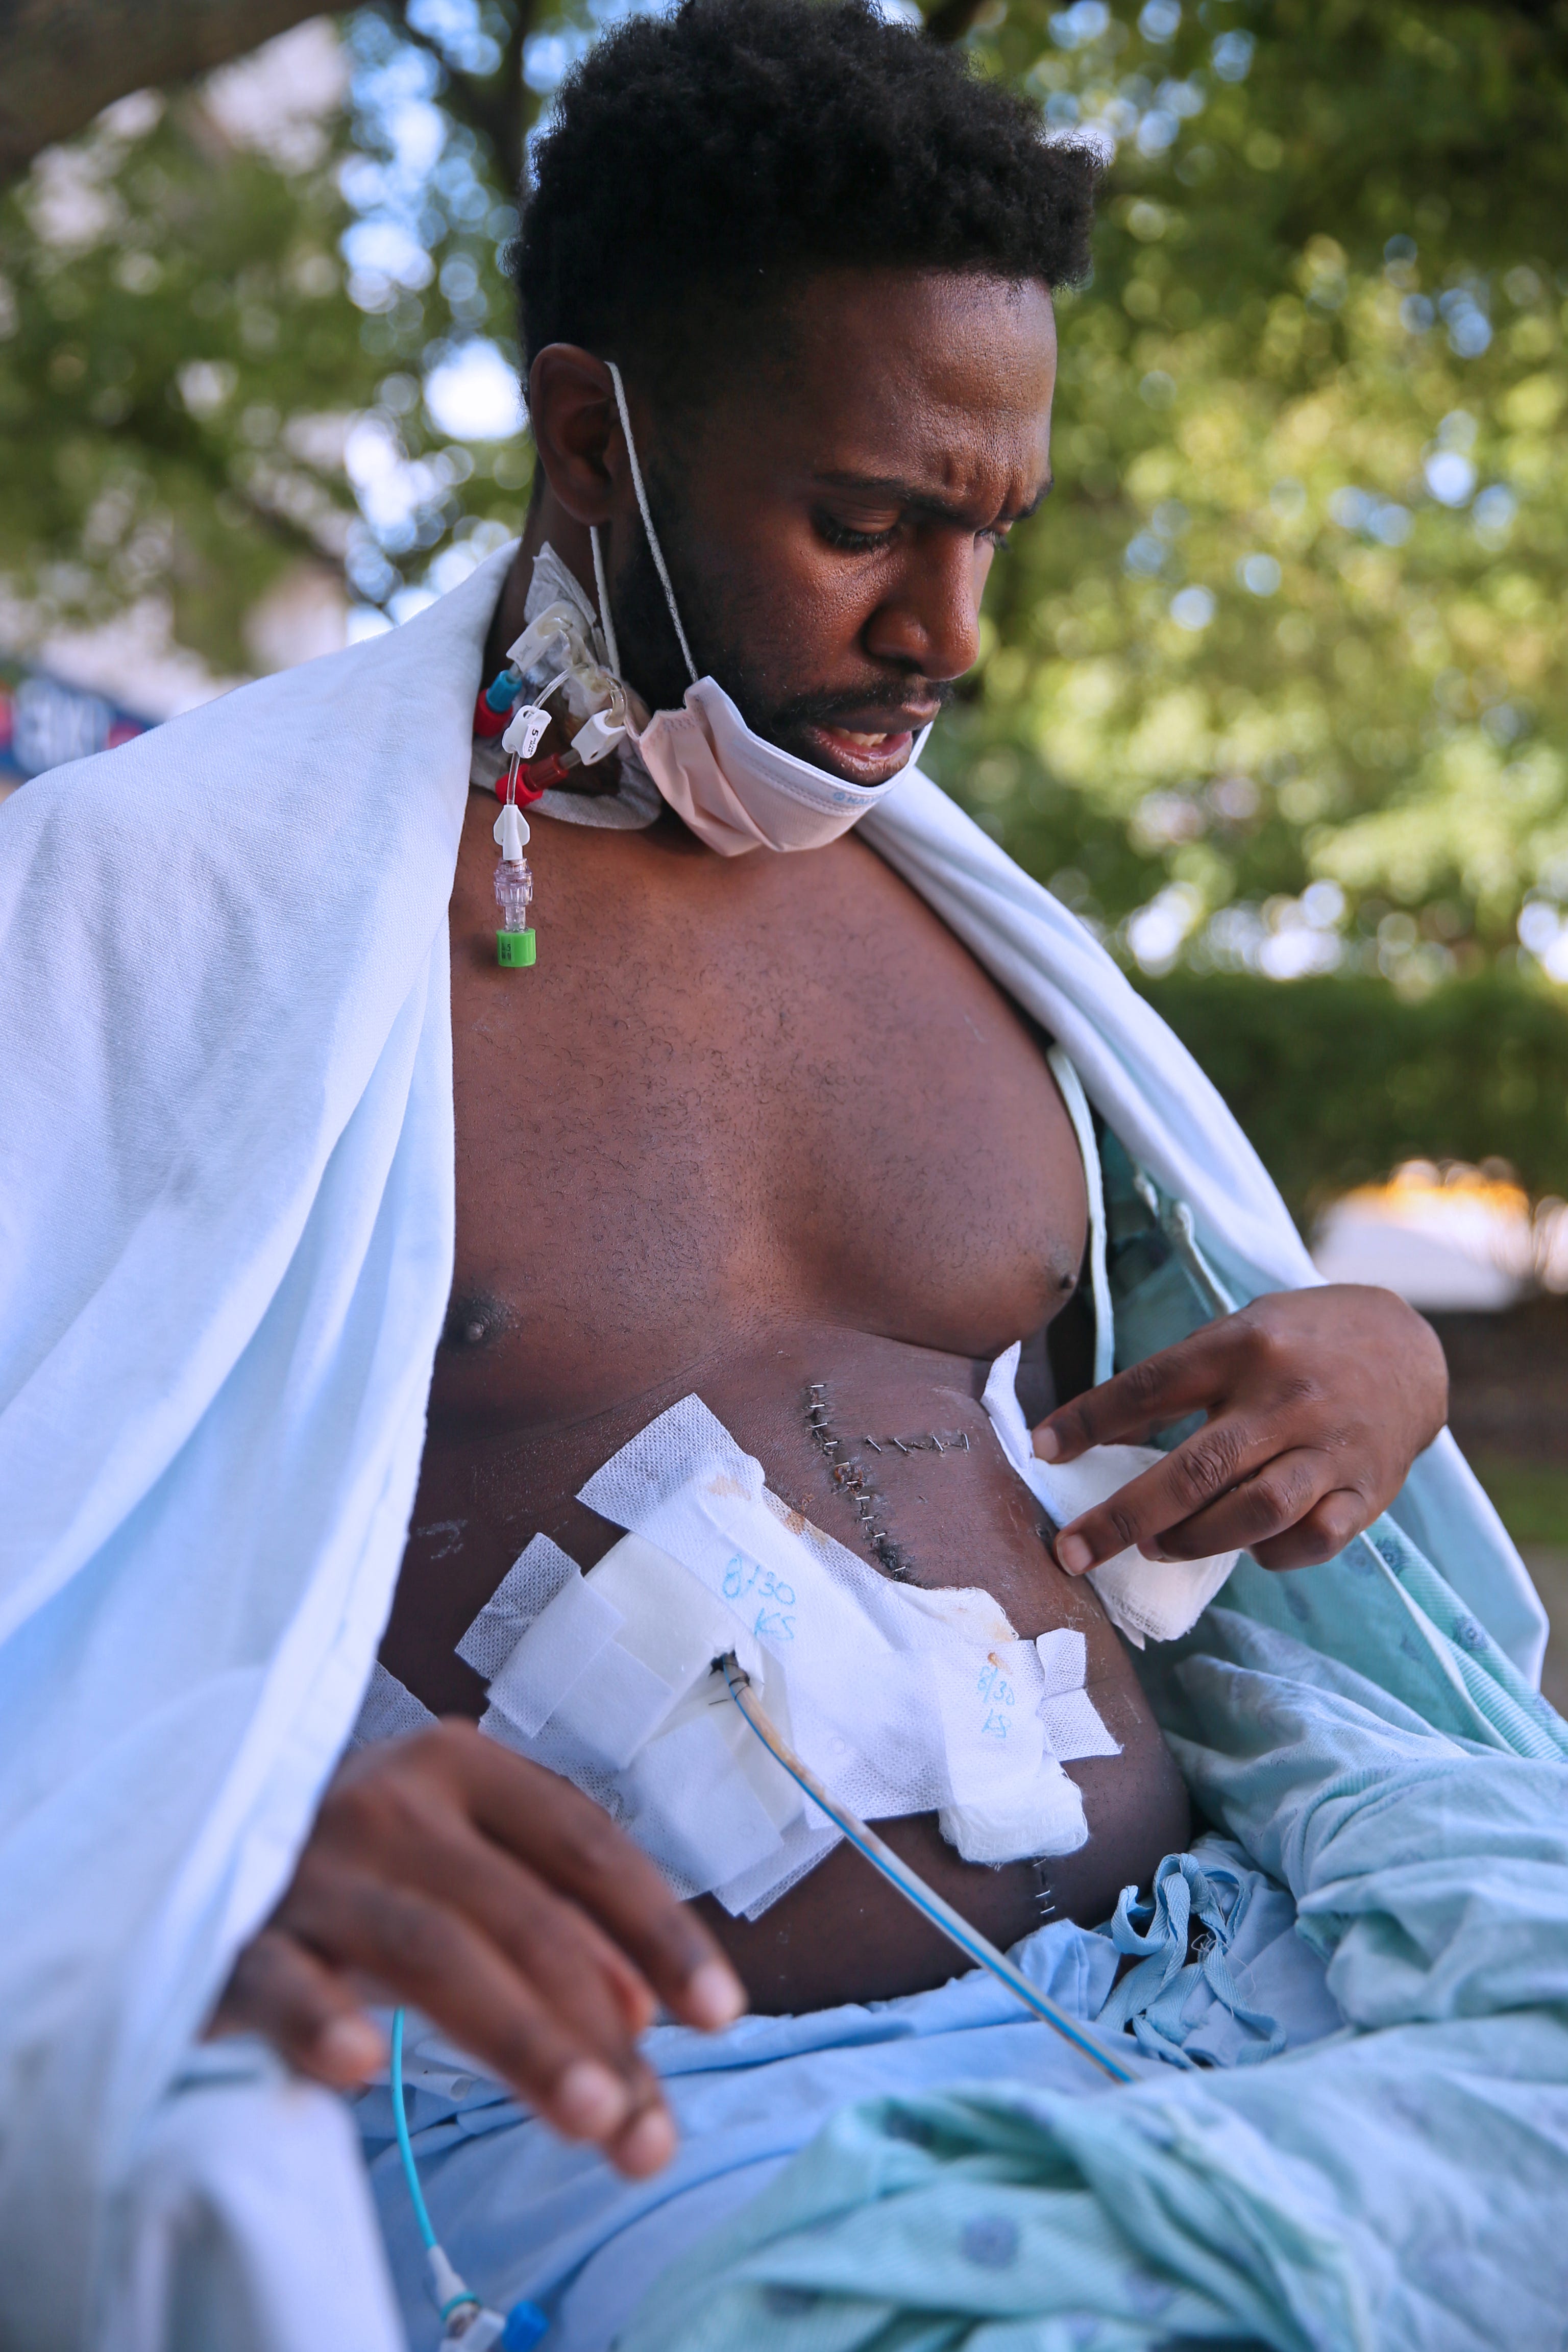 Marlin Dixon shows his wounds outside Froedtert Hospital on Friday, Sept. 2. Dixon was stabbed in the stomach and back during a dispute with his then-girlfriend on Aug. 18, at their apartment in Menomonee Falls.